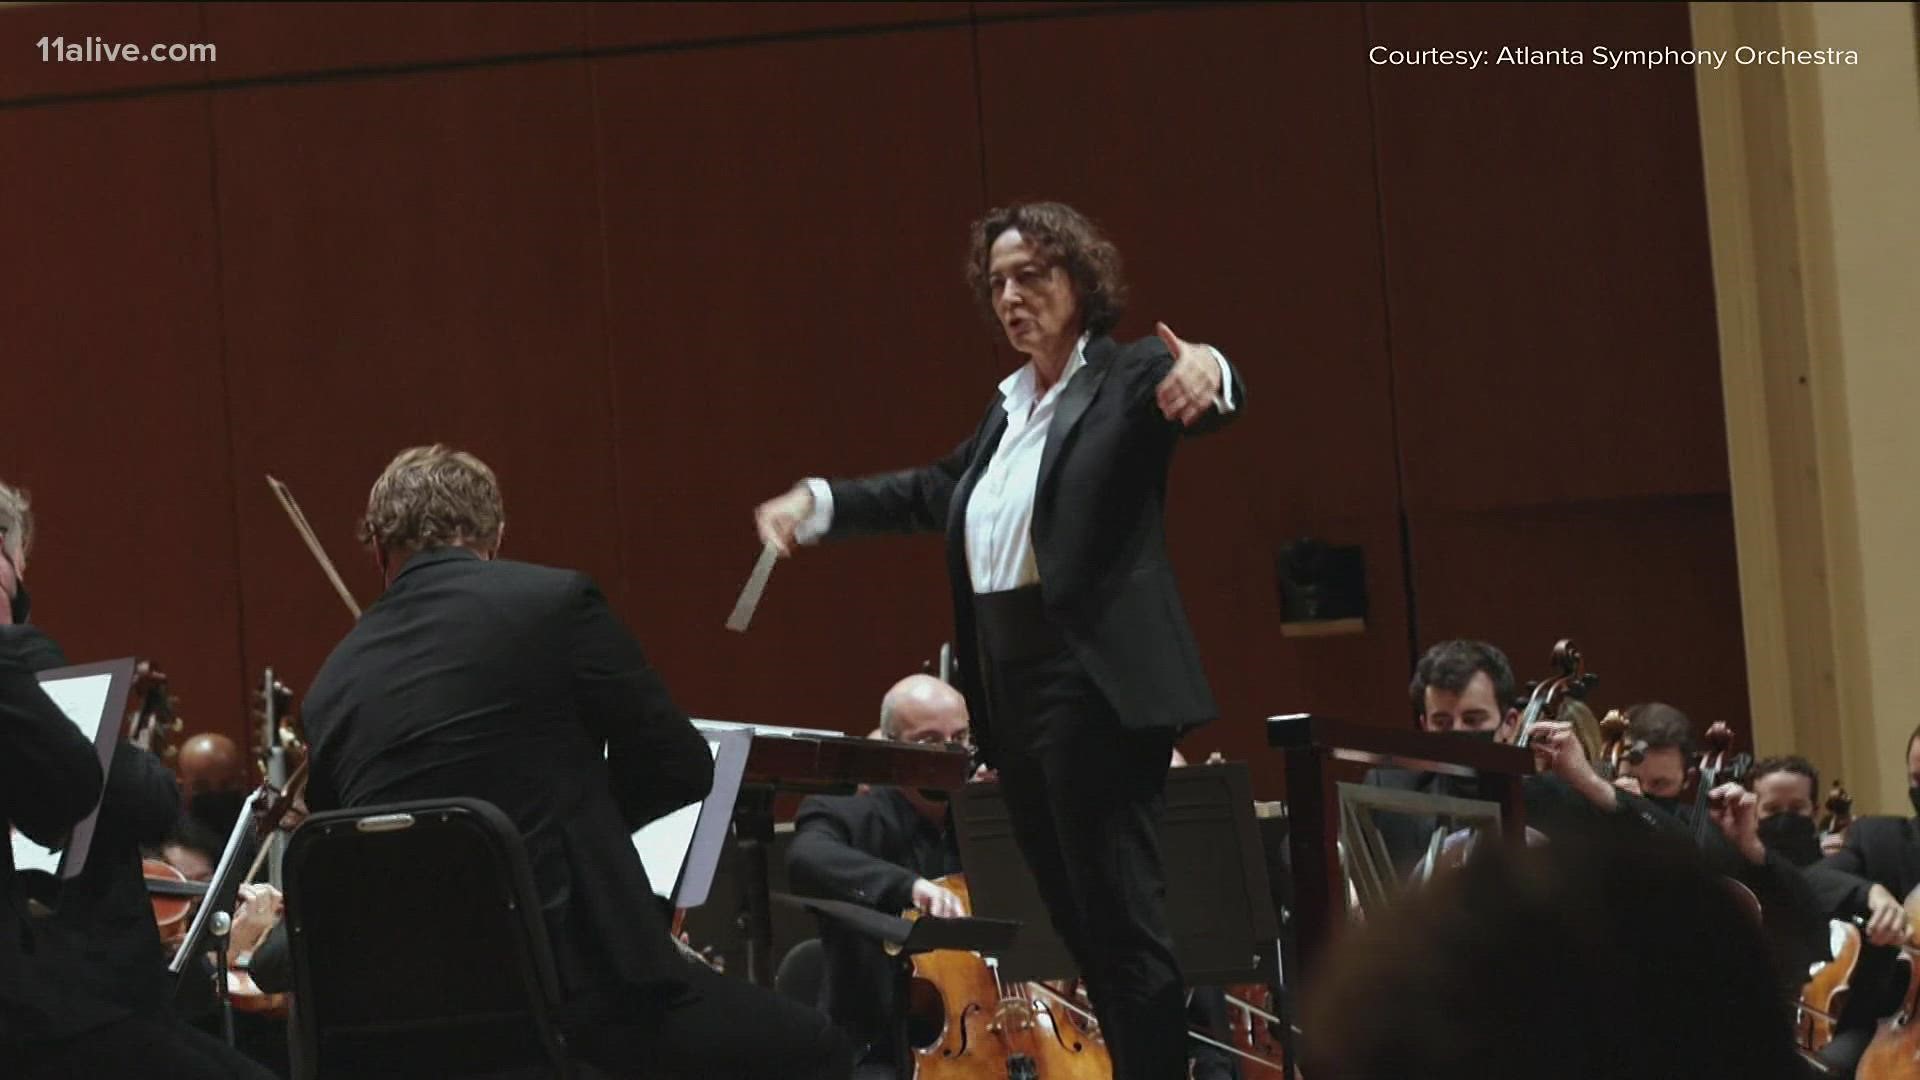 Nathalie Stutzmann studied music in school but was often passed over for the role traditionally held by men.